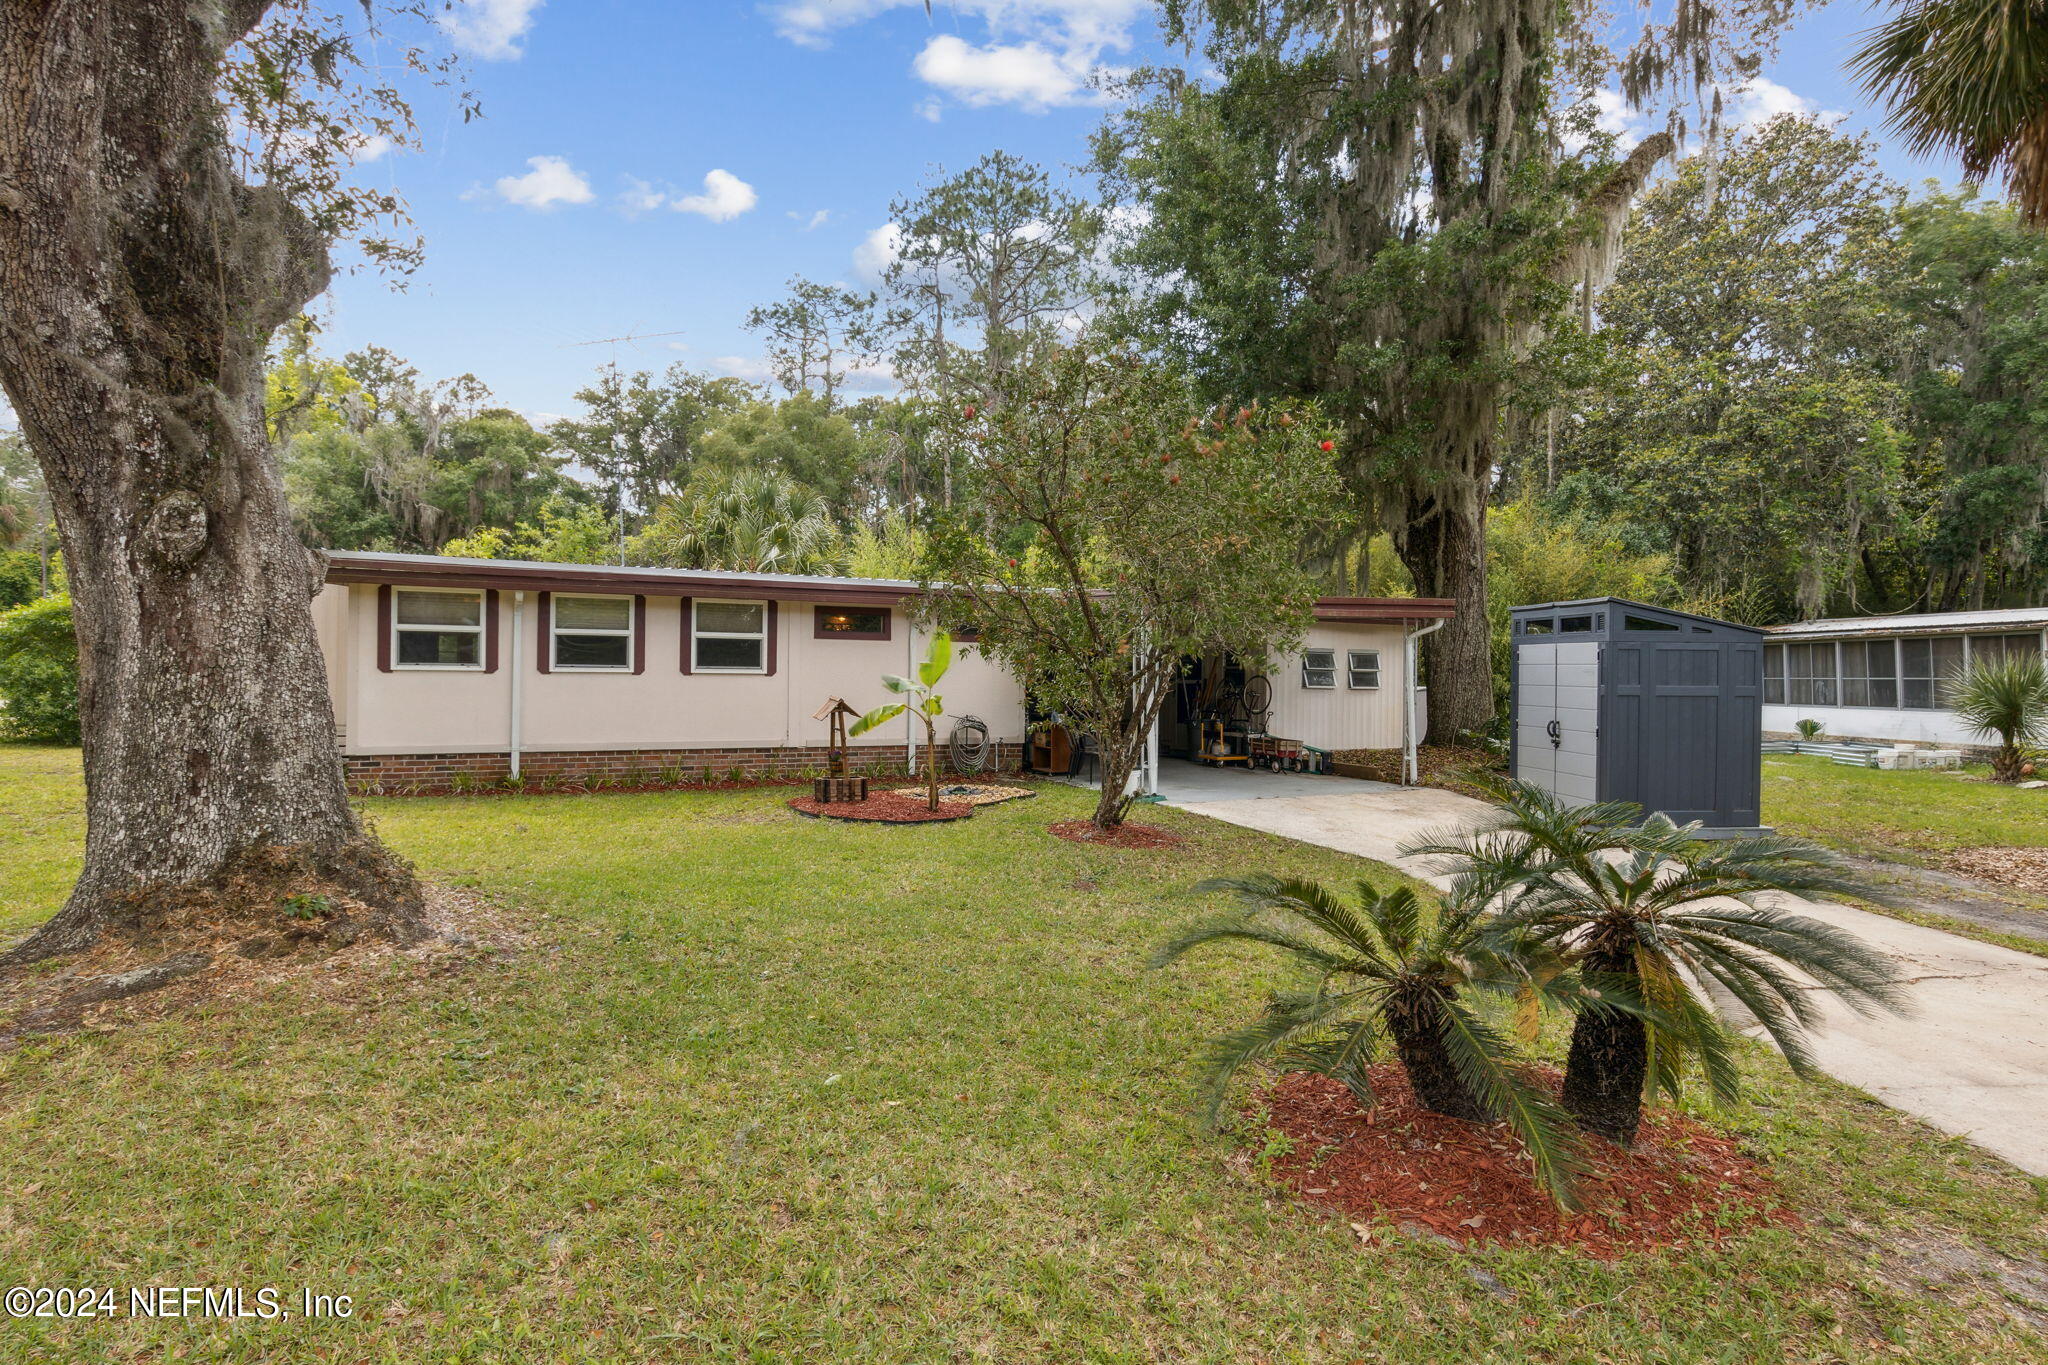 East Palatka, FL home for sale located at 101 Trescot Court, East Palatka, FL 32131